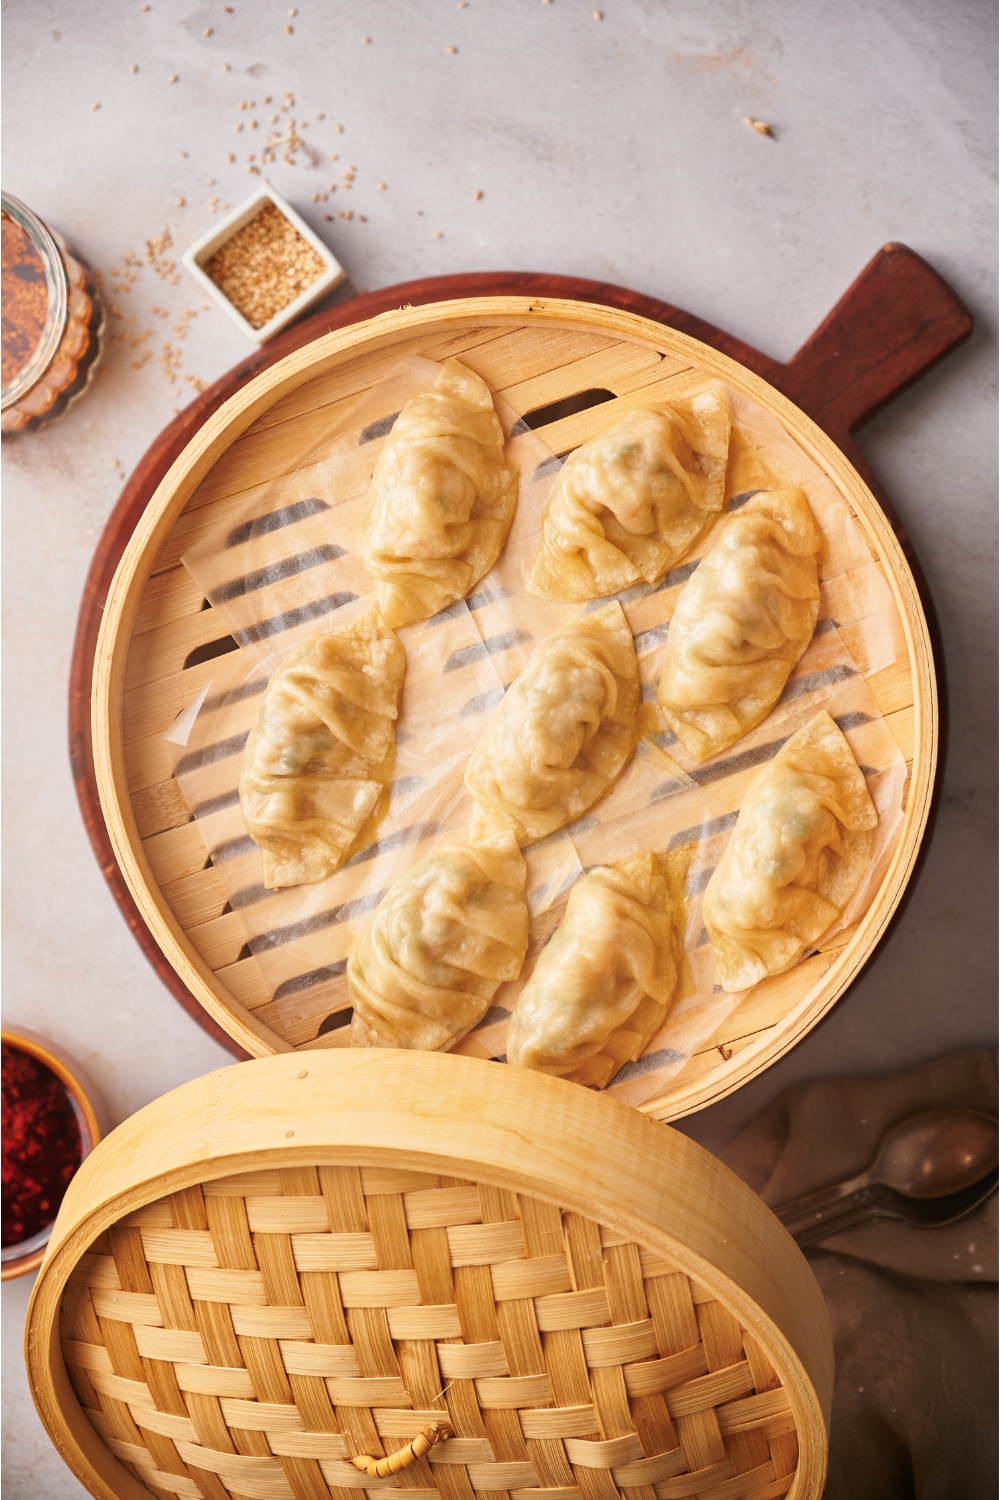 Steamed dumplings in a bamboo steamer resting on a wood board. The lid has been removed and is balanced on the side of the steamer.